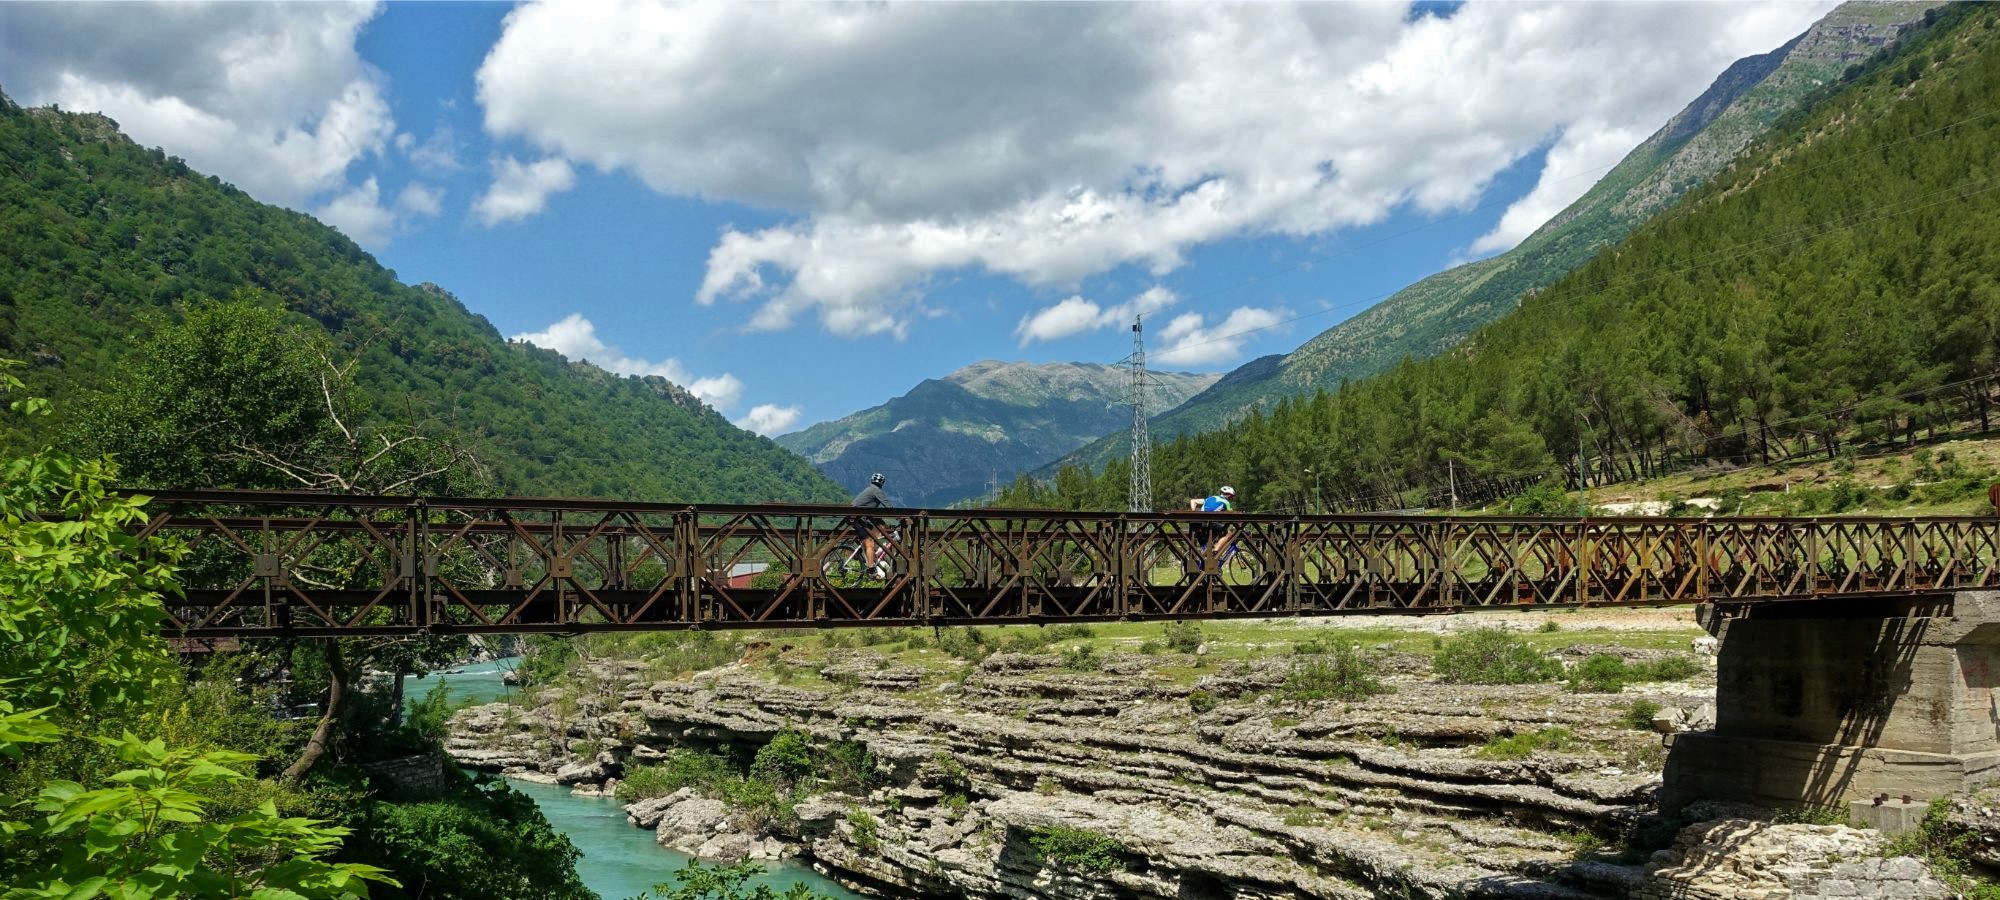 Photos from our Albania - Classic Cycling Holiday